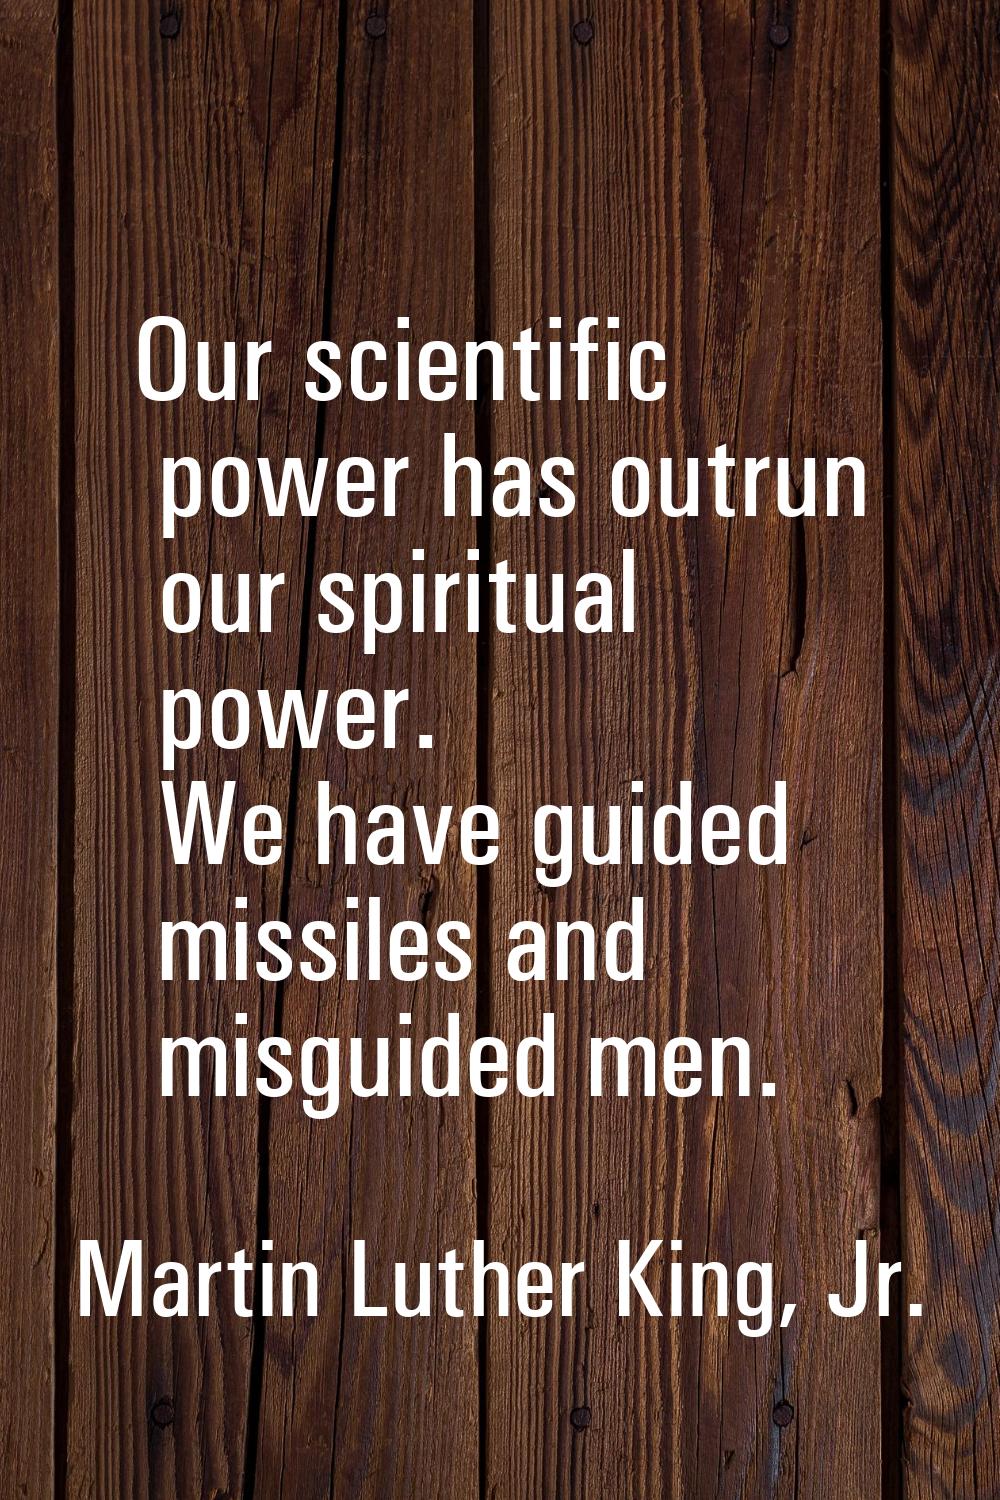 Our scientific power has outrun our spiritual power. We have guided missiles and misguided men.